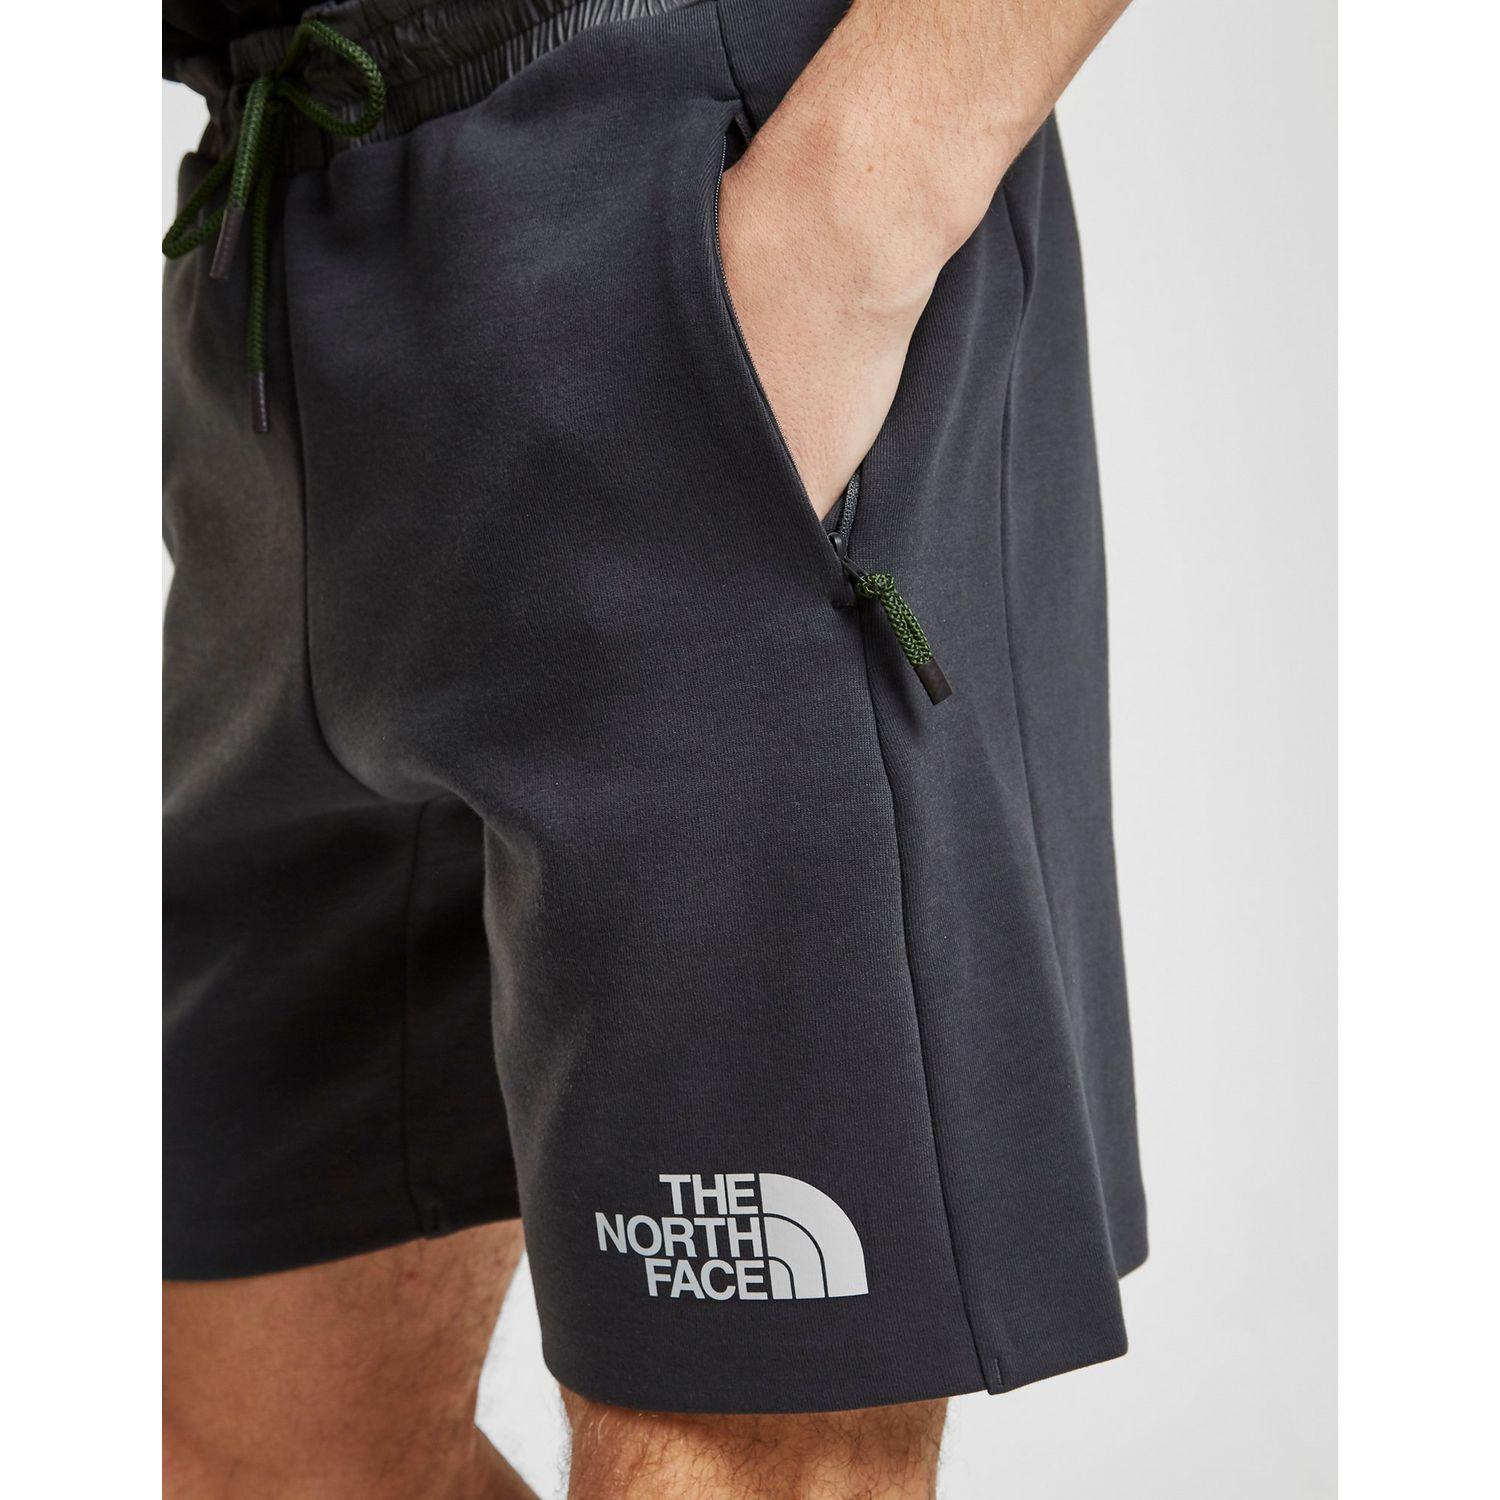 The North Face Cotton Vista Tek Shorts in Grey (Grey) for Men - Lyst